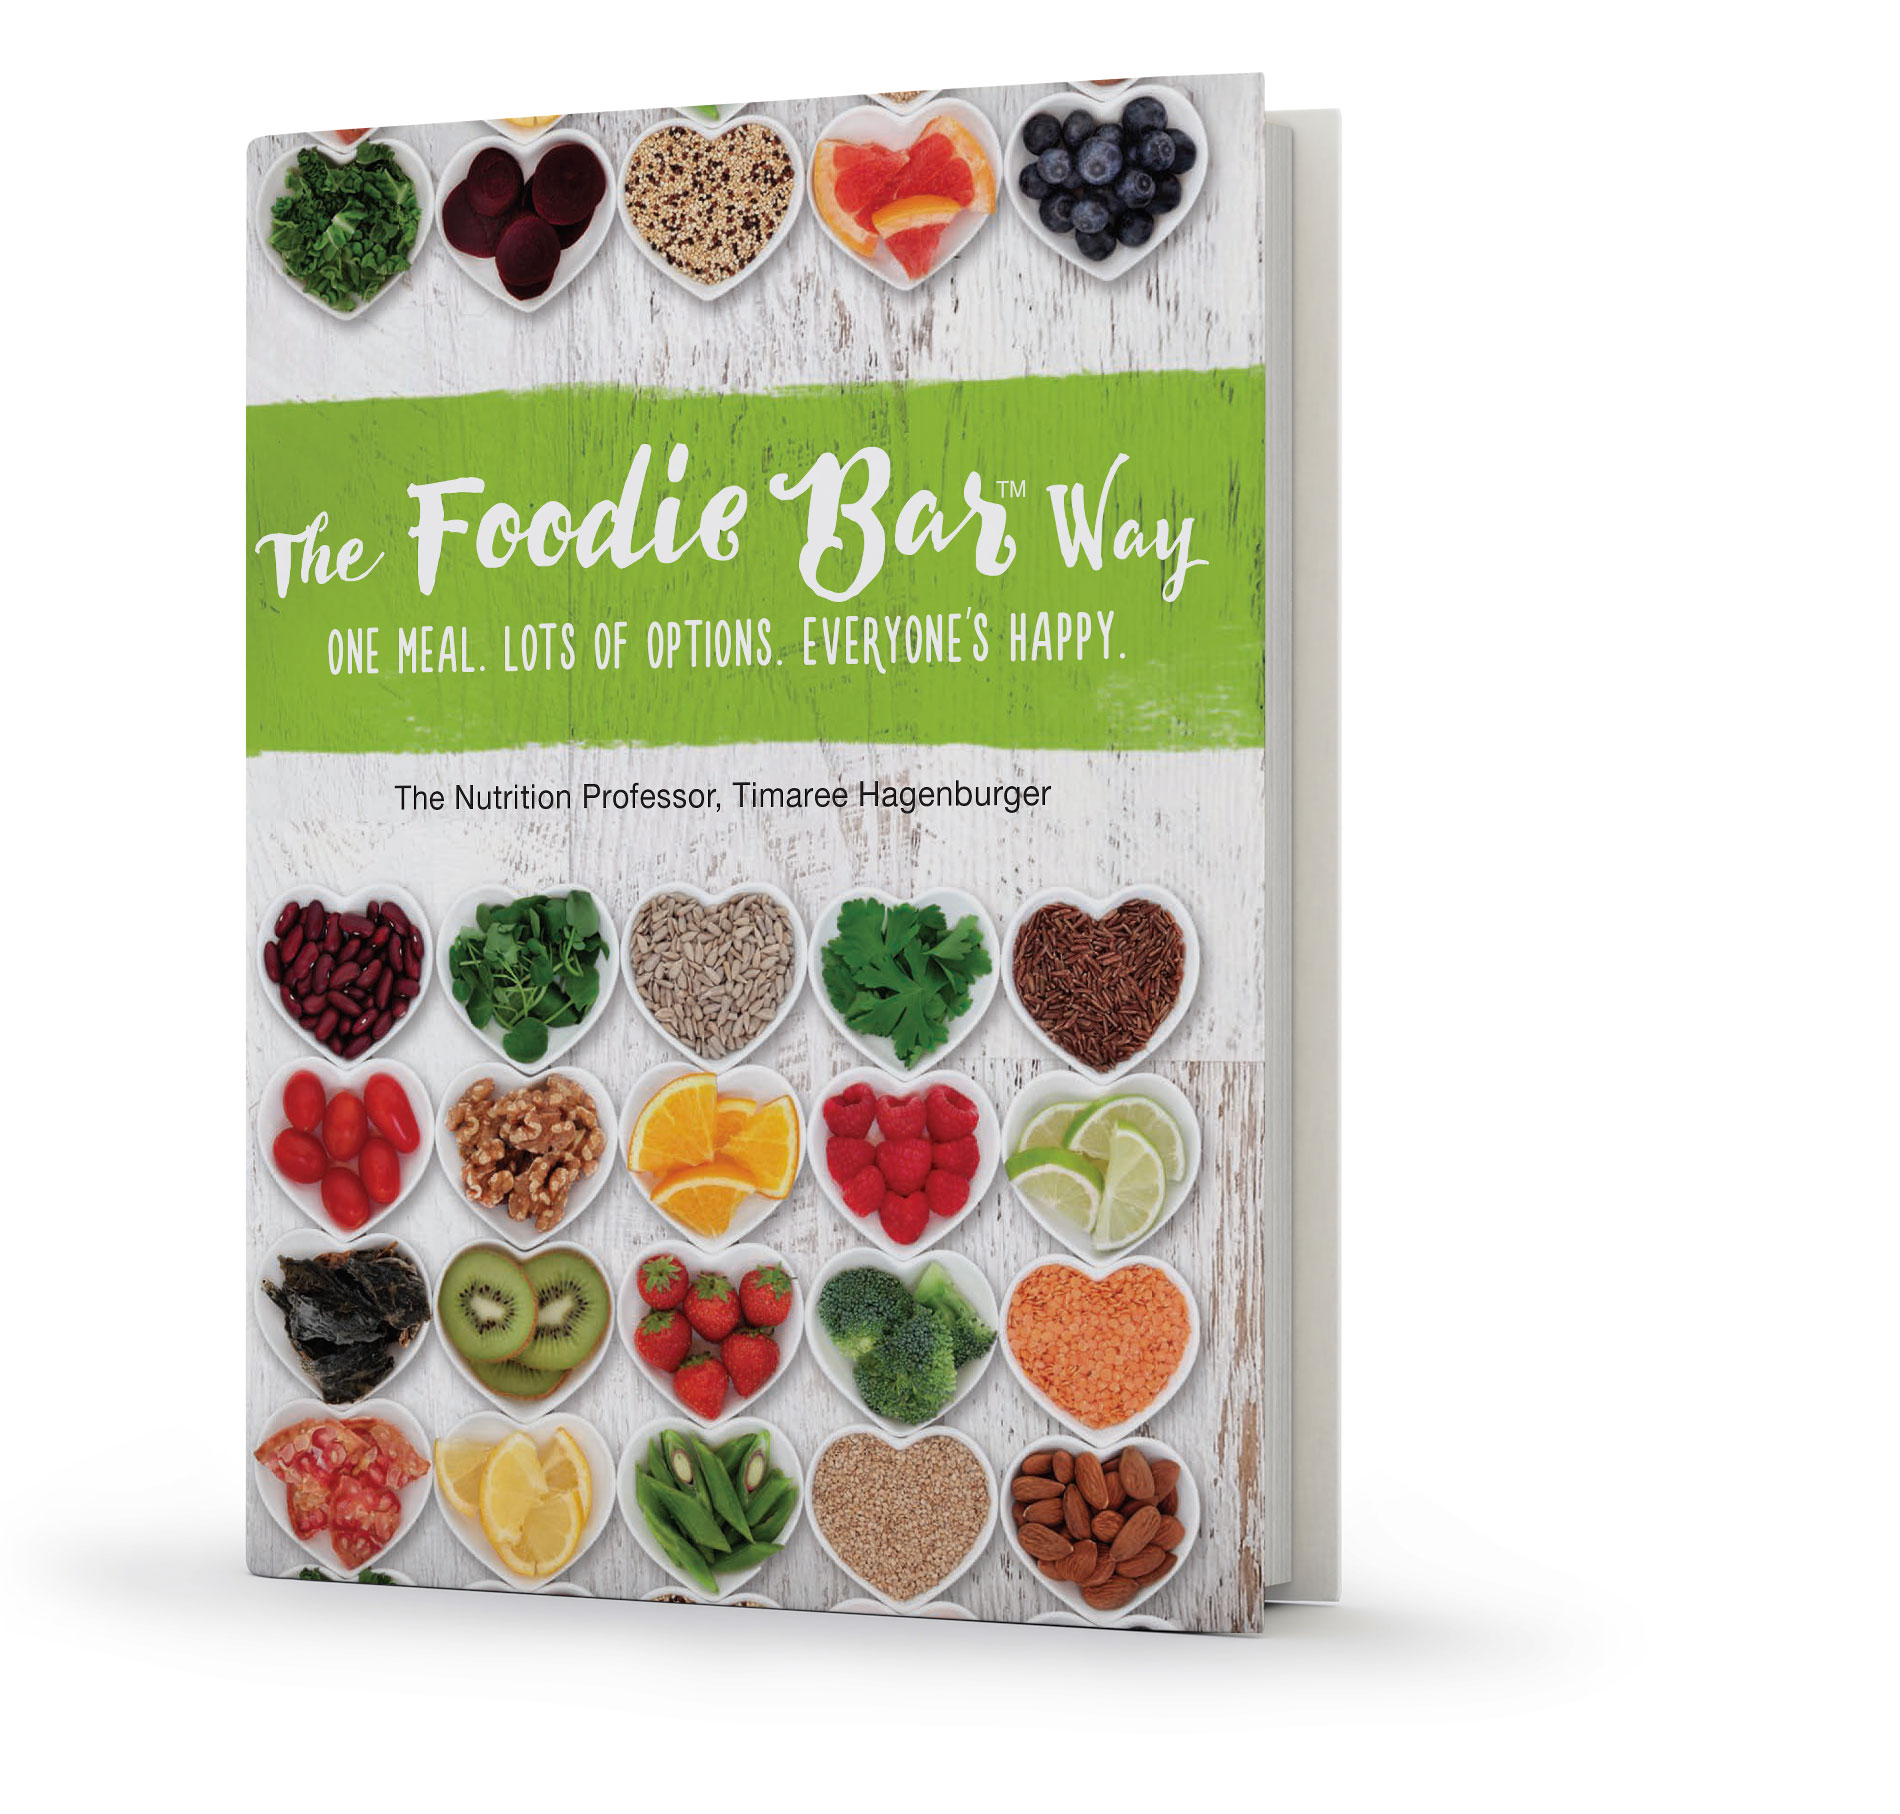 The Foodie Bar Way, book, Cookbook, printed book, ebook, The Foodie Bar Way of Life, Timaree Hagenburger, The Nutrition Professor, Foodie Bars, One meal, lots of options, so everyone’s happy, families, creativity, kitchen, preparing food, meal preps, family-friendly, kid-friendly, options, abundance, plant-based whole food, vegan food, vegan, plant-based, health, wellness, Feel Good with plenty of energy to enjoy your life, dressings, hummus, pesto, scramble, pizza, loaded potato, potato, tempeh, oatmeal, ceviche, cauliflower, nachos, pasta, Italian, seasonings, dessert, sauces, smoothies, rice, beans, whole grains, fruit, fruits, vegetables, vegetarian, broccoli, mushrooms, greens, tomatoes, berries, nuts, seeds, citrus, snacks, choices, recipes, mix-and-match, fun, innovative, flexible, easy,  